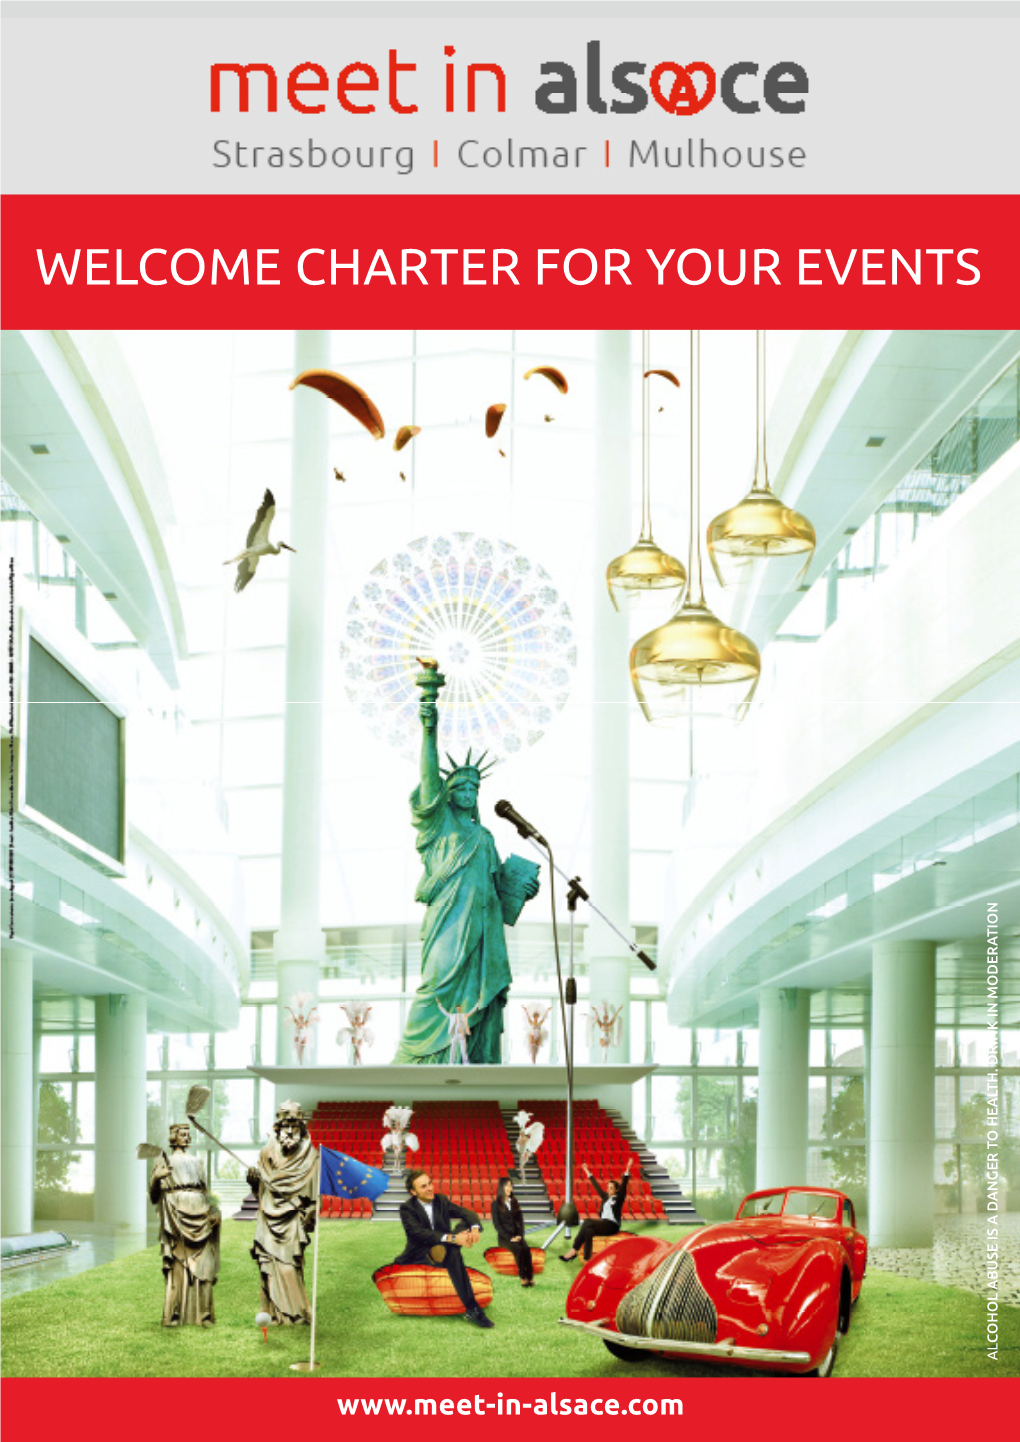 Welcome Charter for Your Events Cohol Abuse Is a Danger to Health